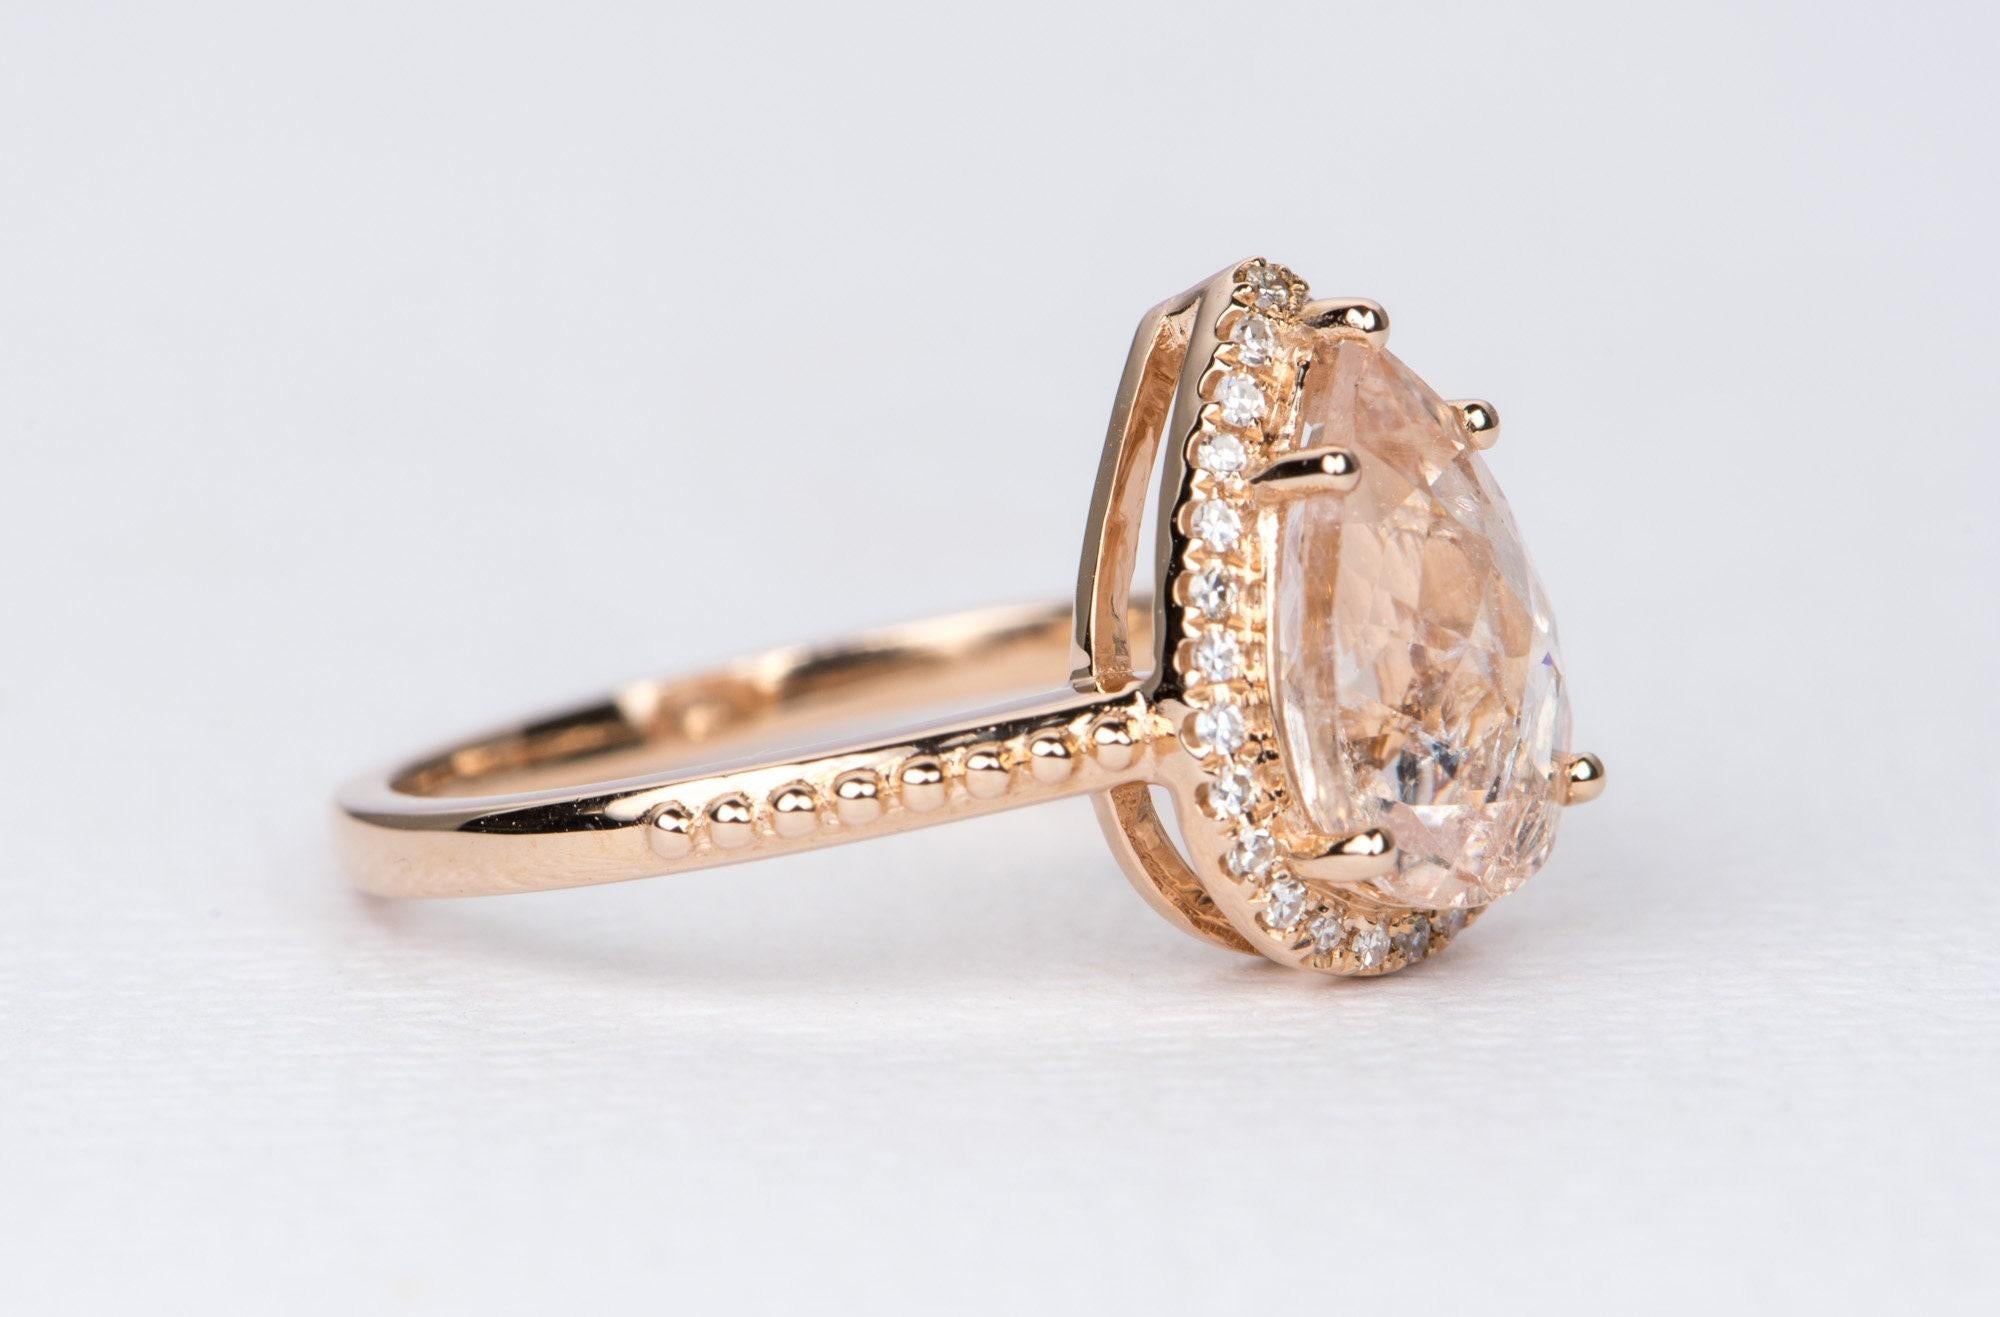 14k rose gold pear shape csarite ring with chocolate diamond accents